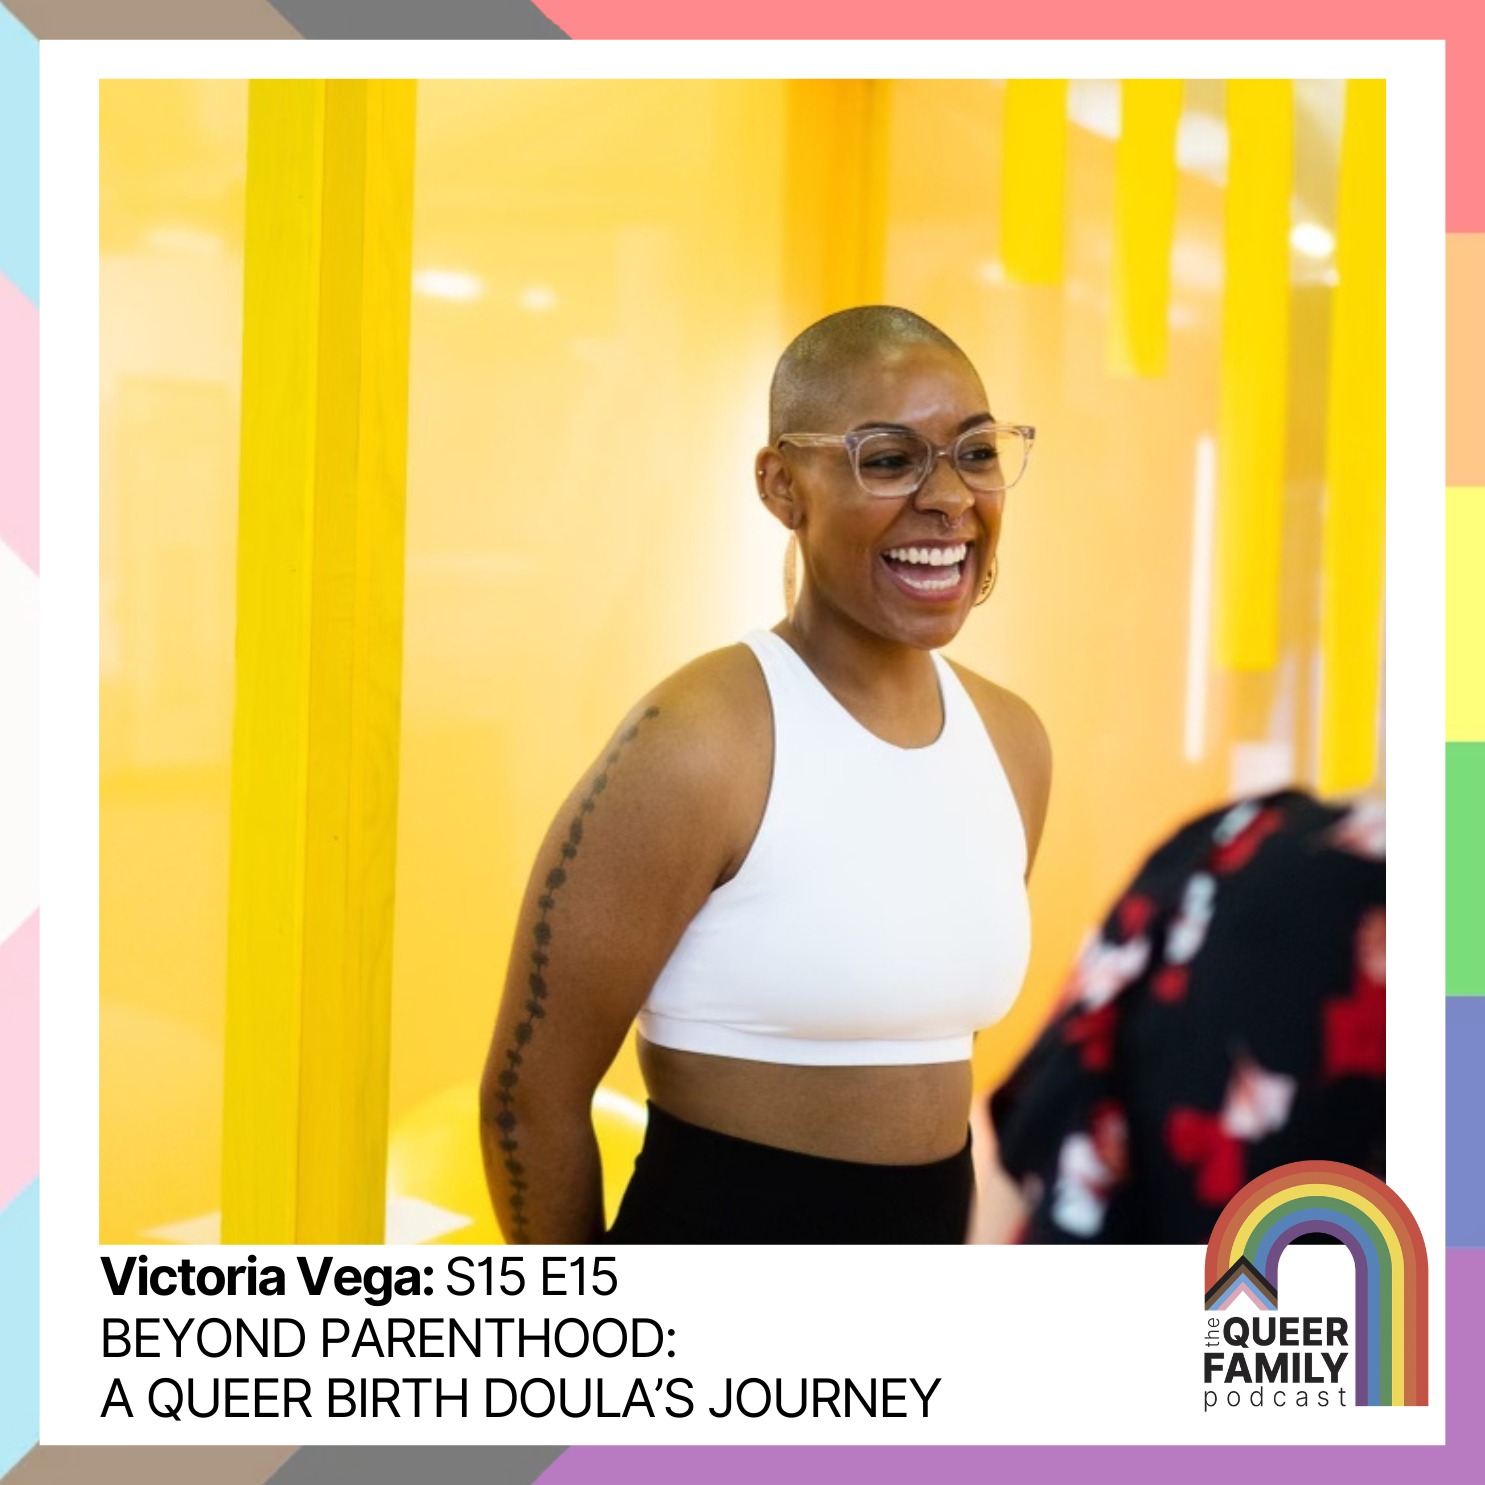 Beyond Parenthood: A Queer Birth Doula’s Journey